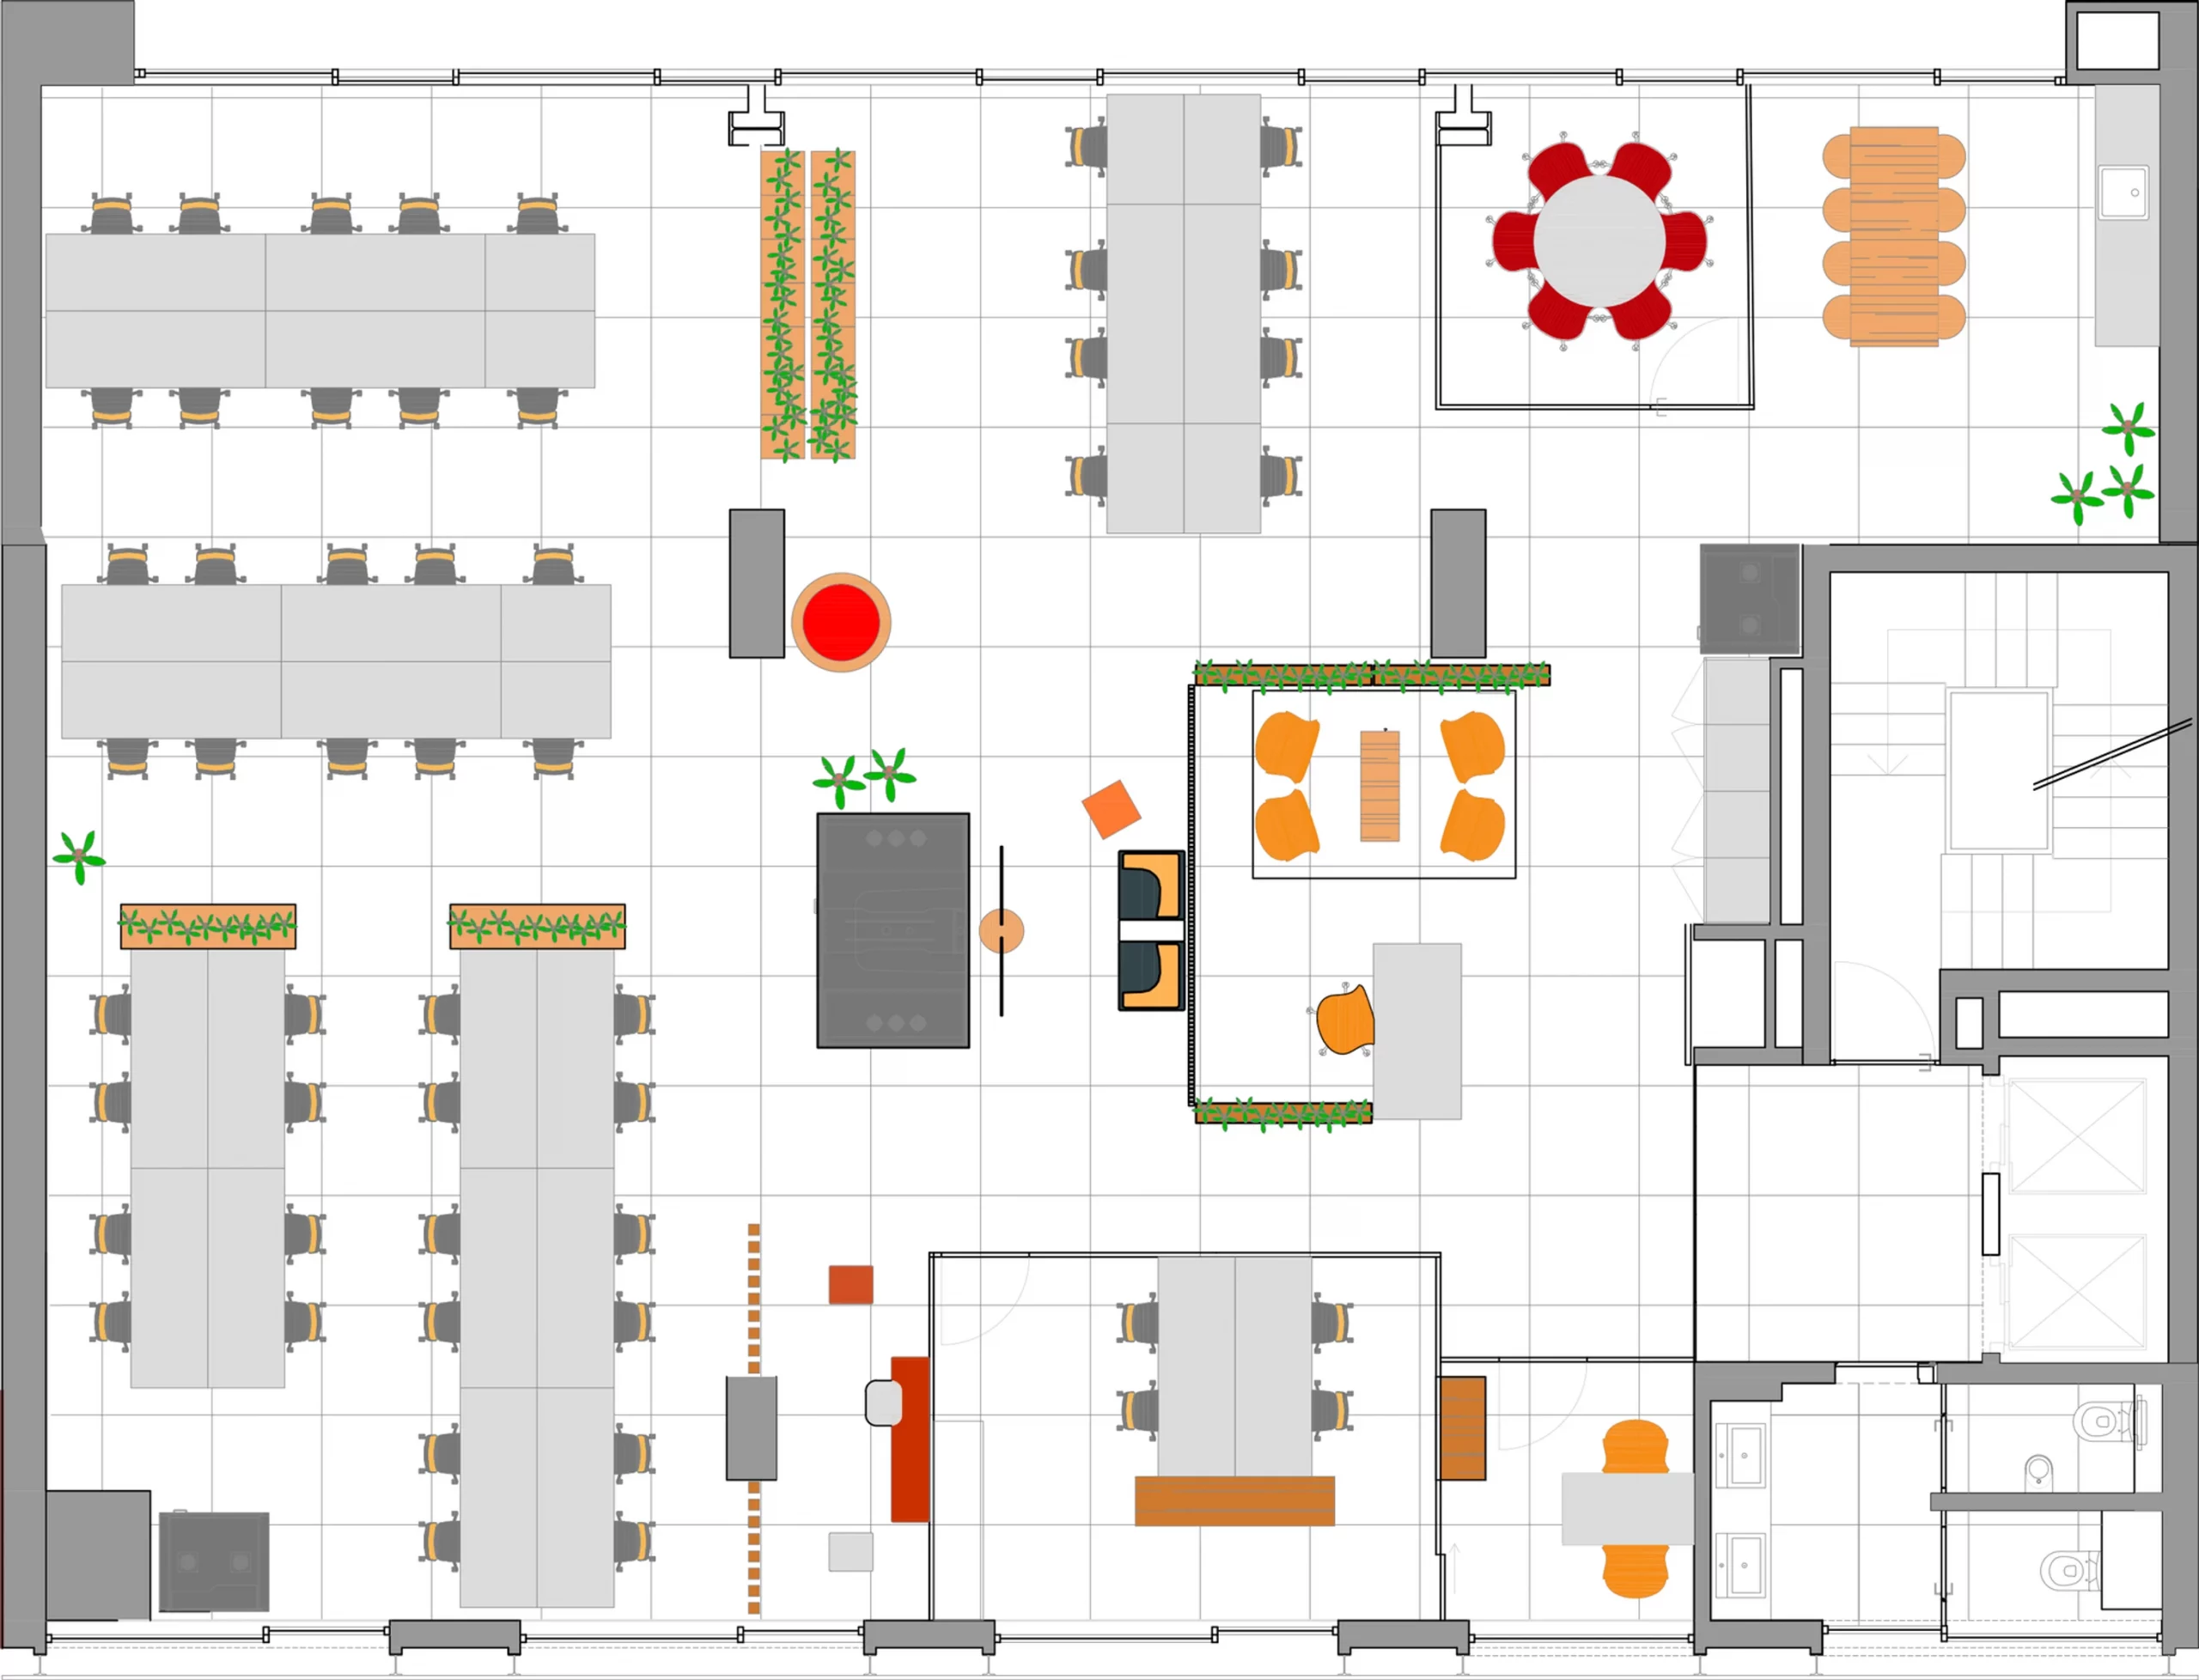 3 Floor plan of the new Medicare offices